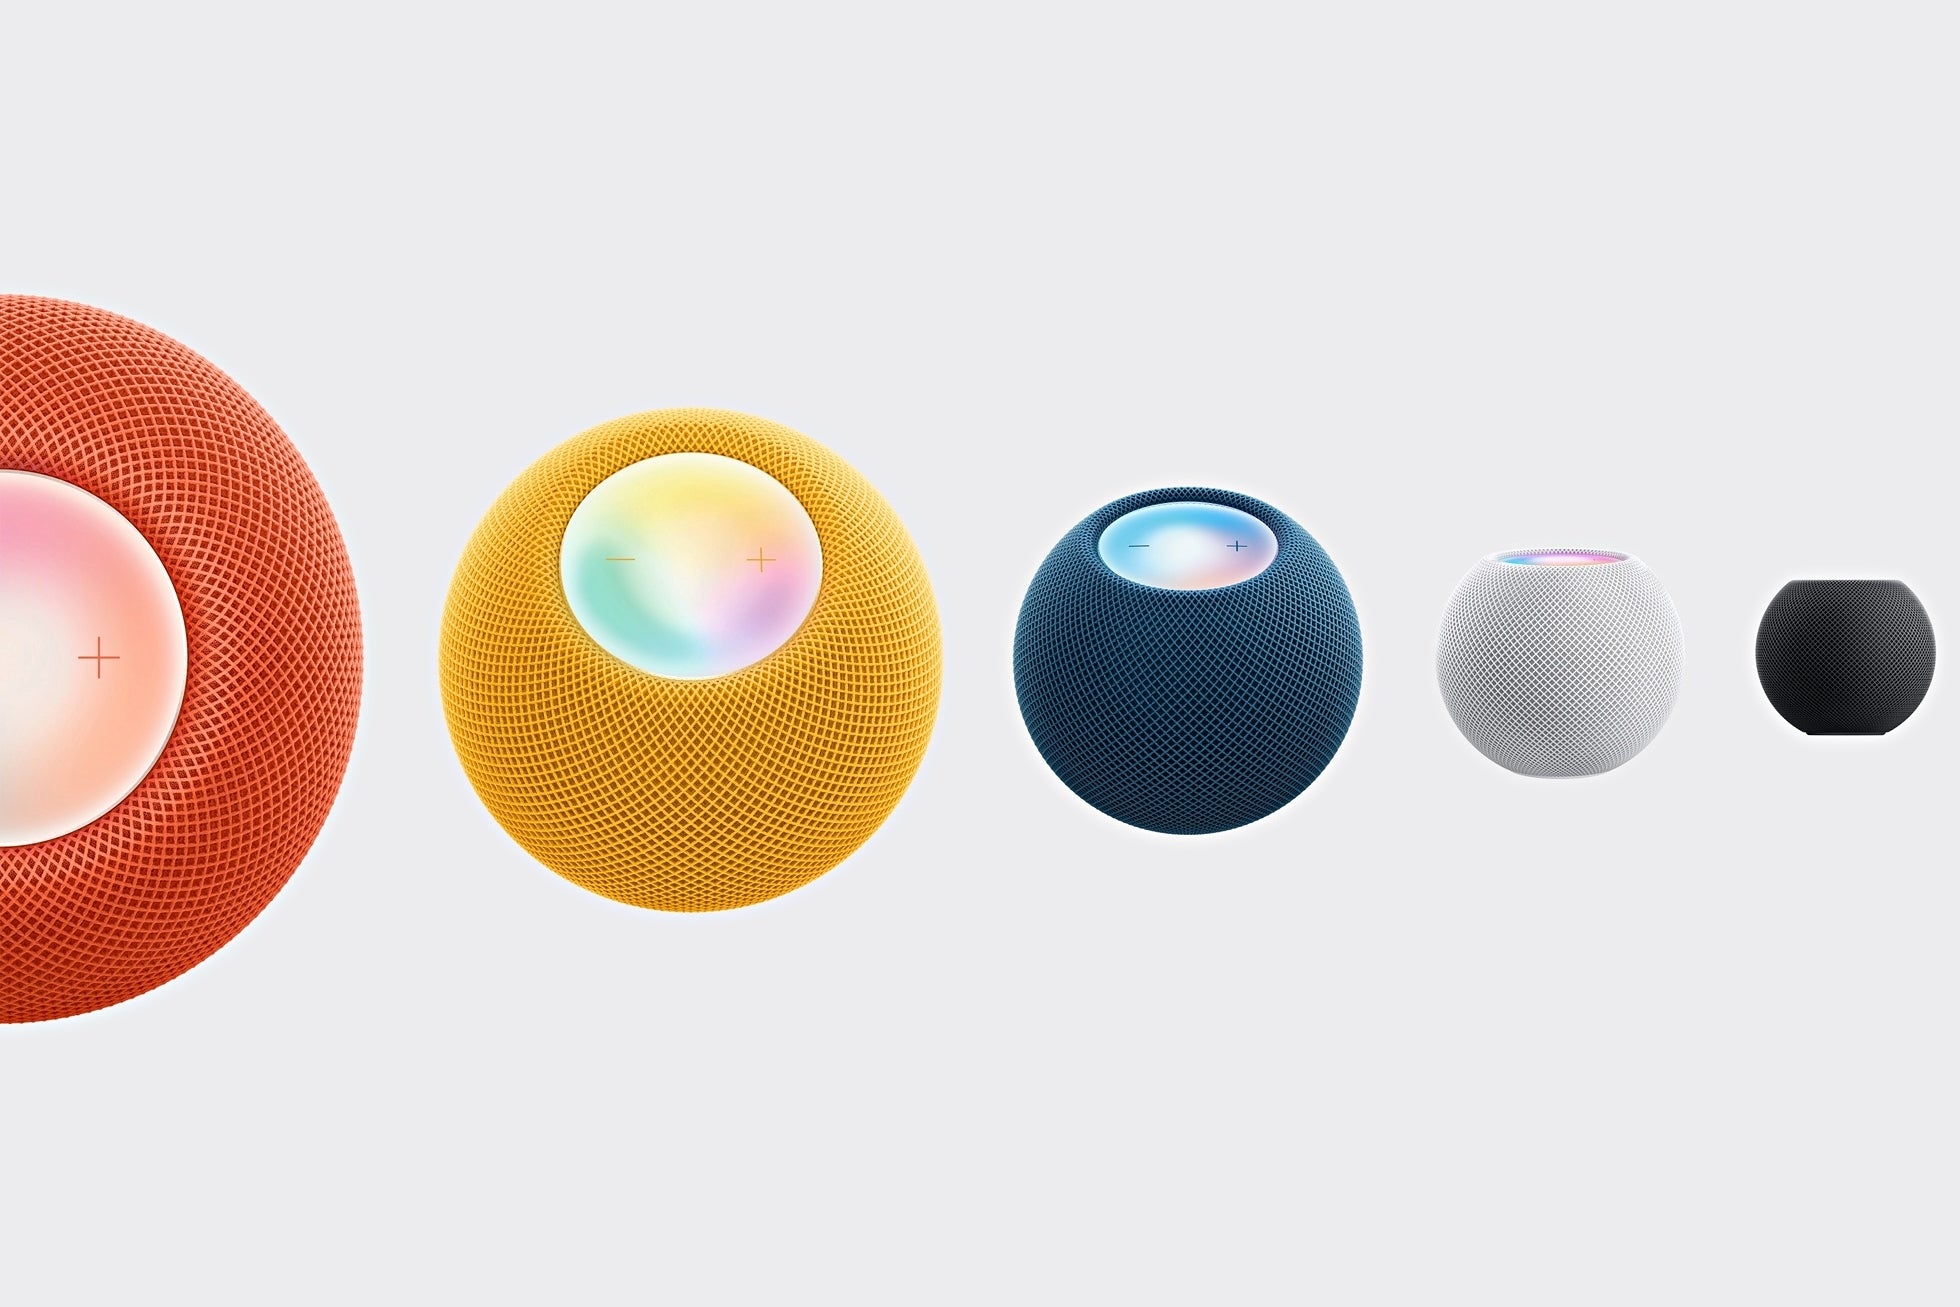 The HomePod mini in all its color options - Apple's HomePod mini now available in three new colors